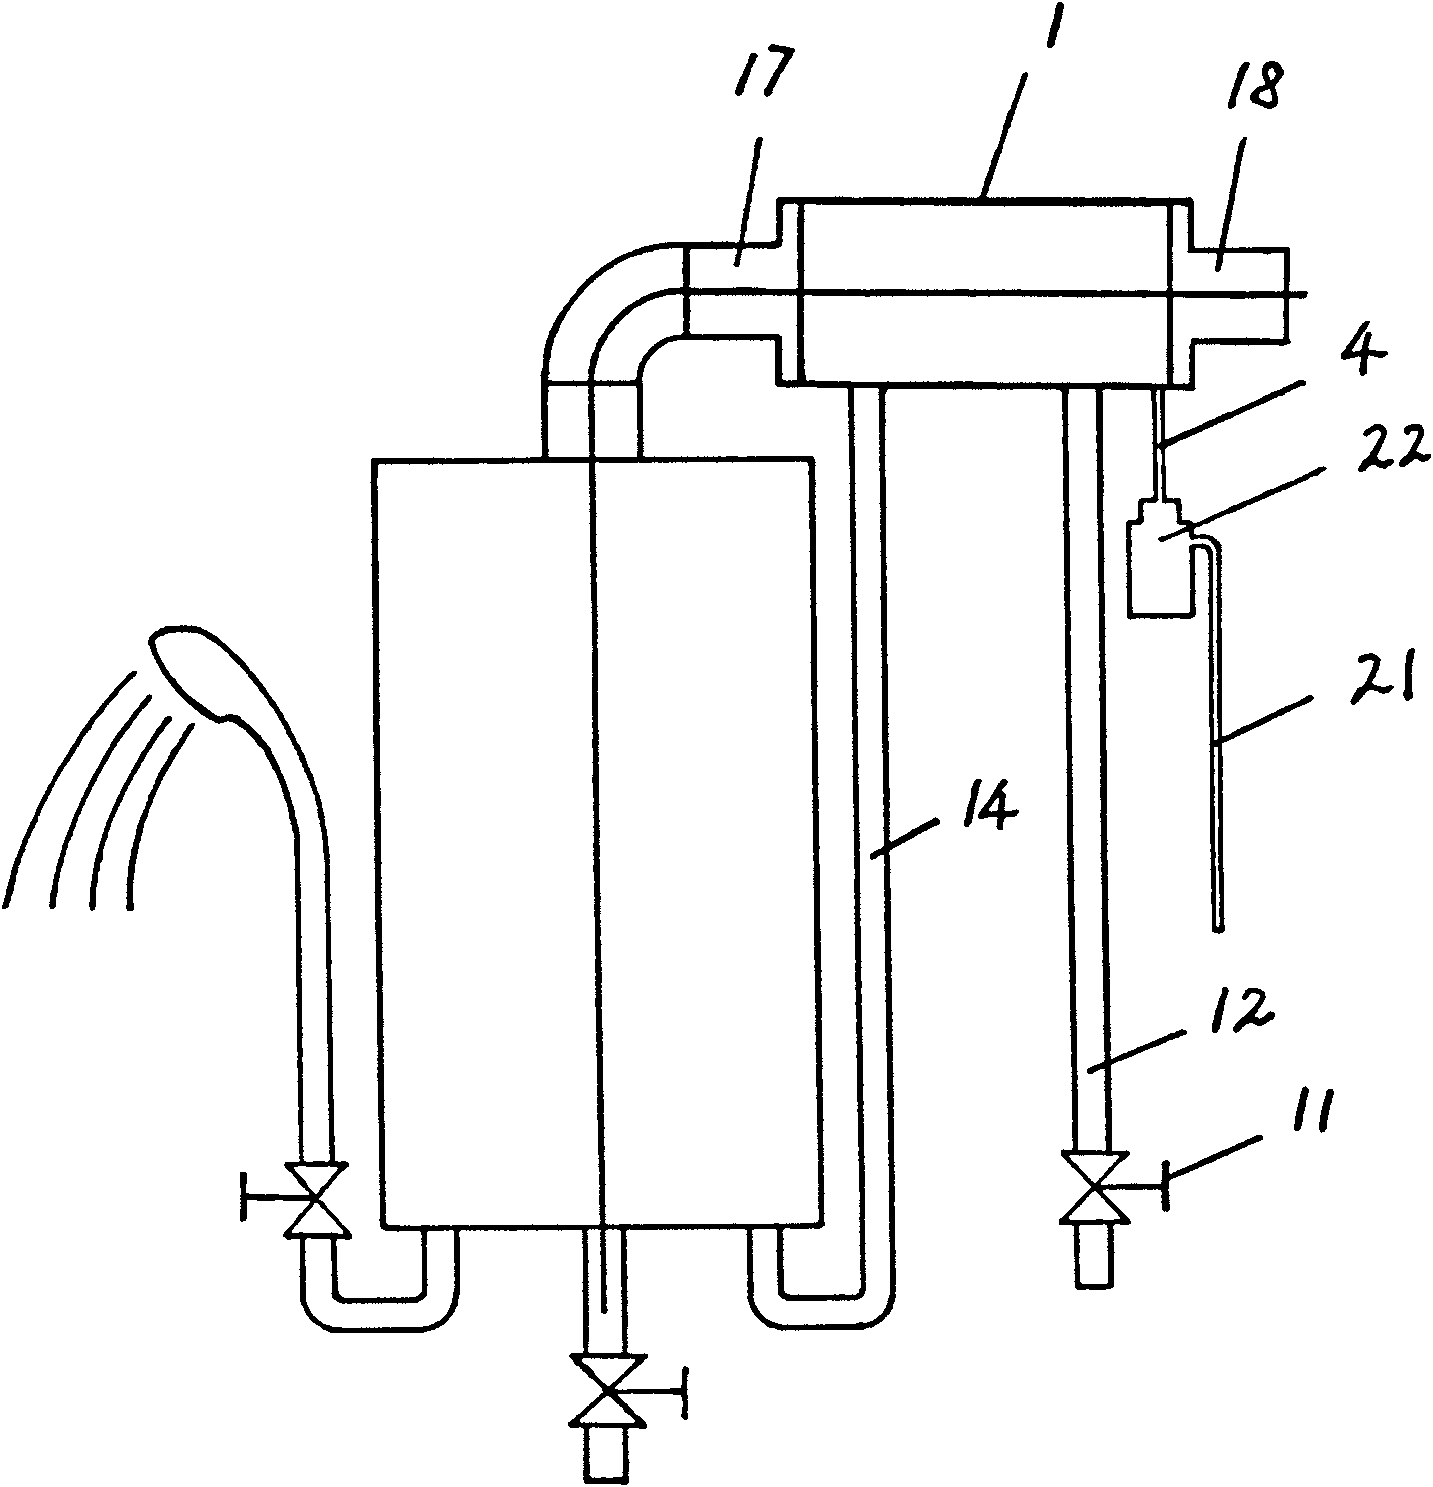 Flue thermal-arrest energy-saving device of domestic gas water heater